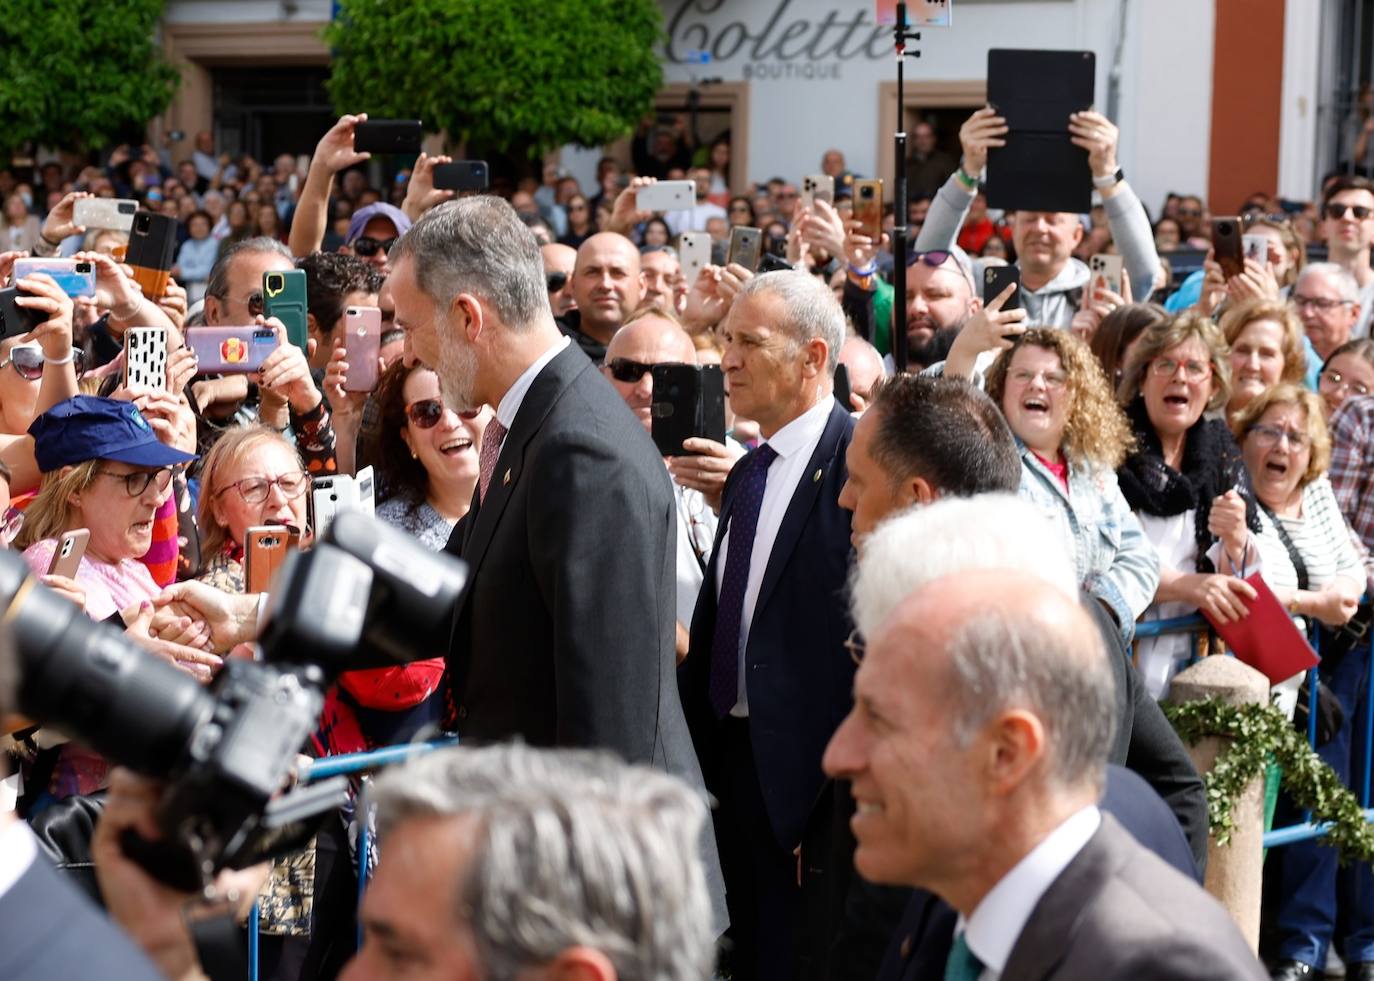 Photo special: King Felipe VI makes his first visit to Ronda